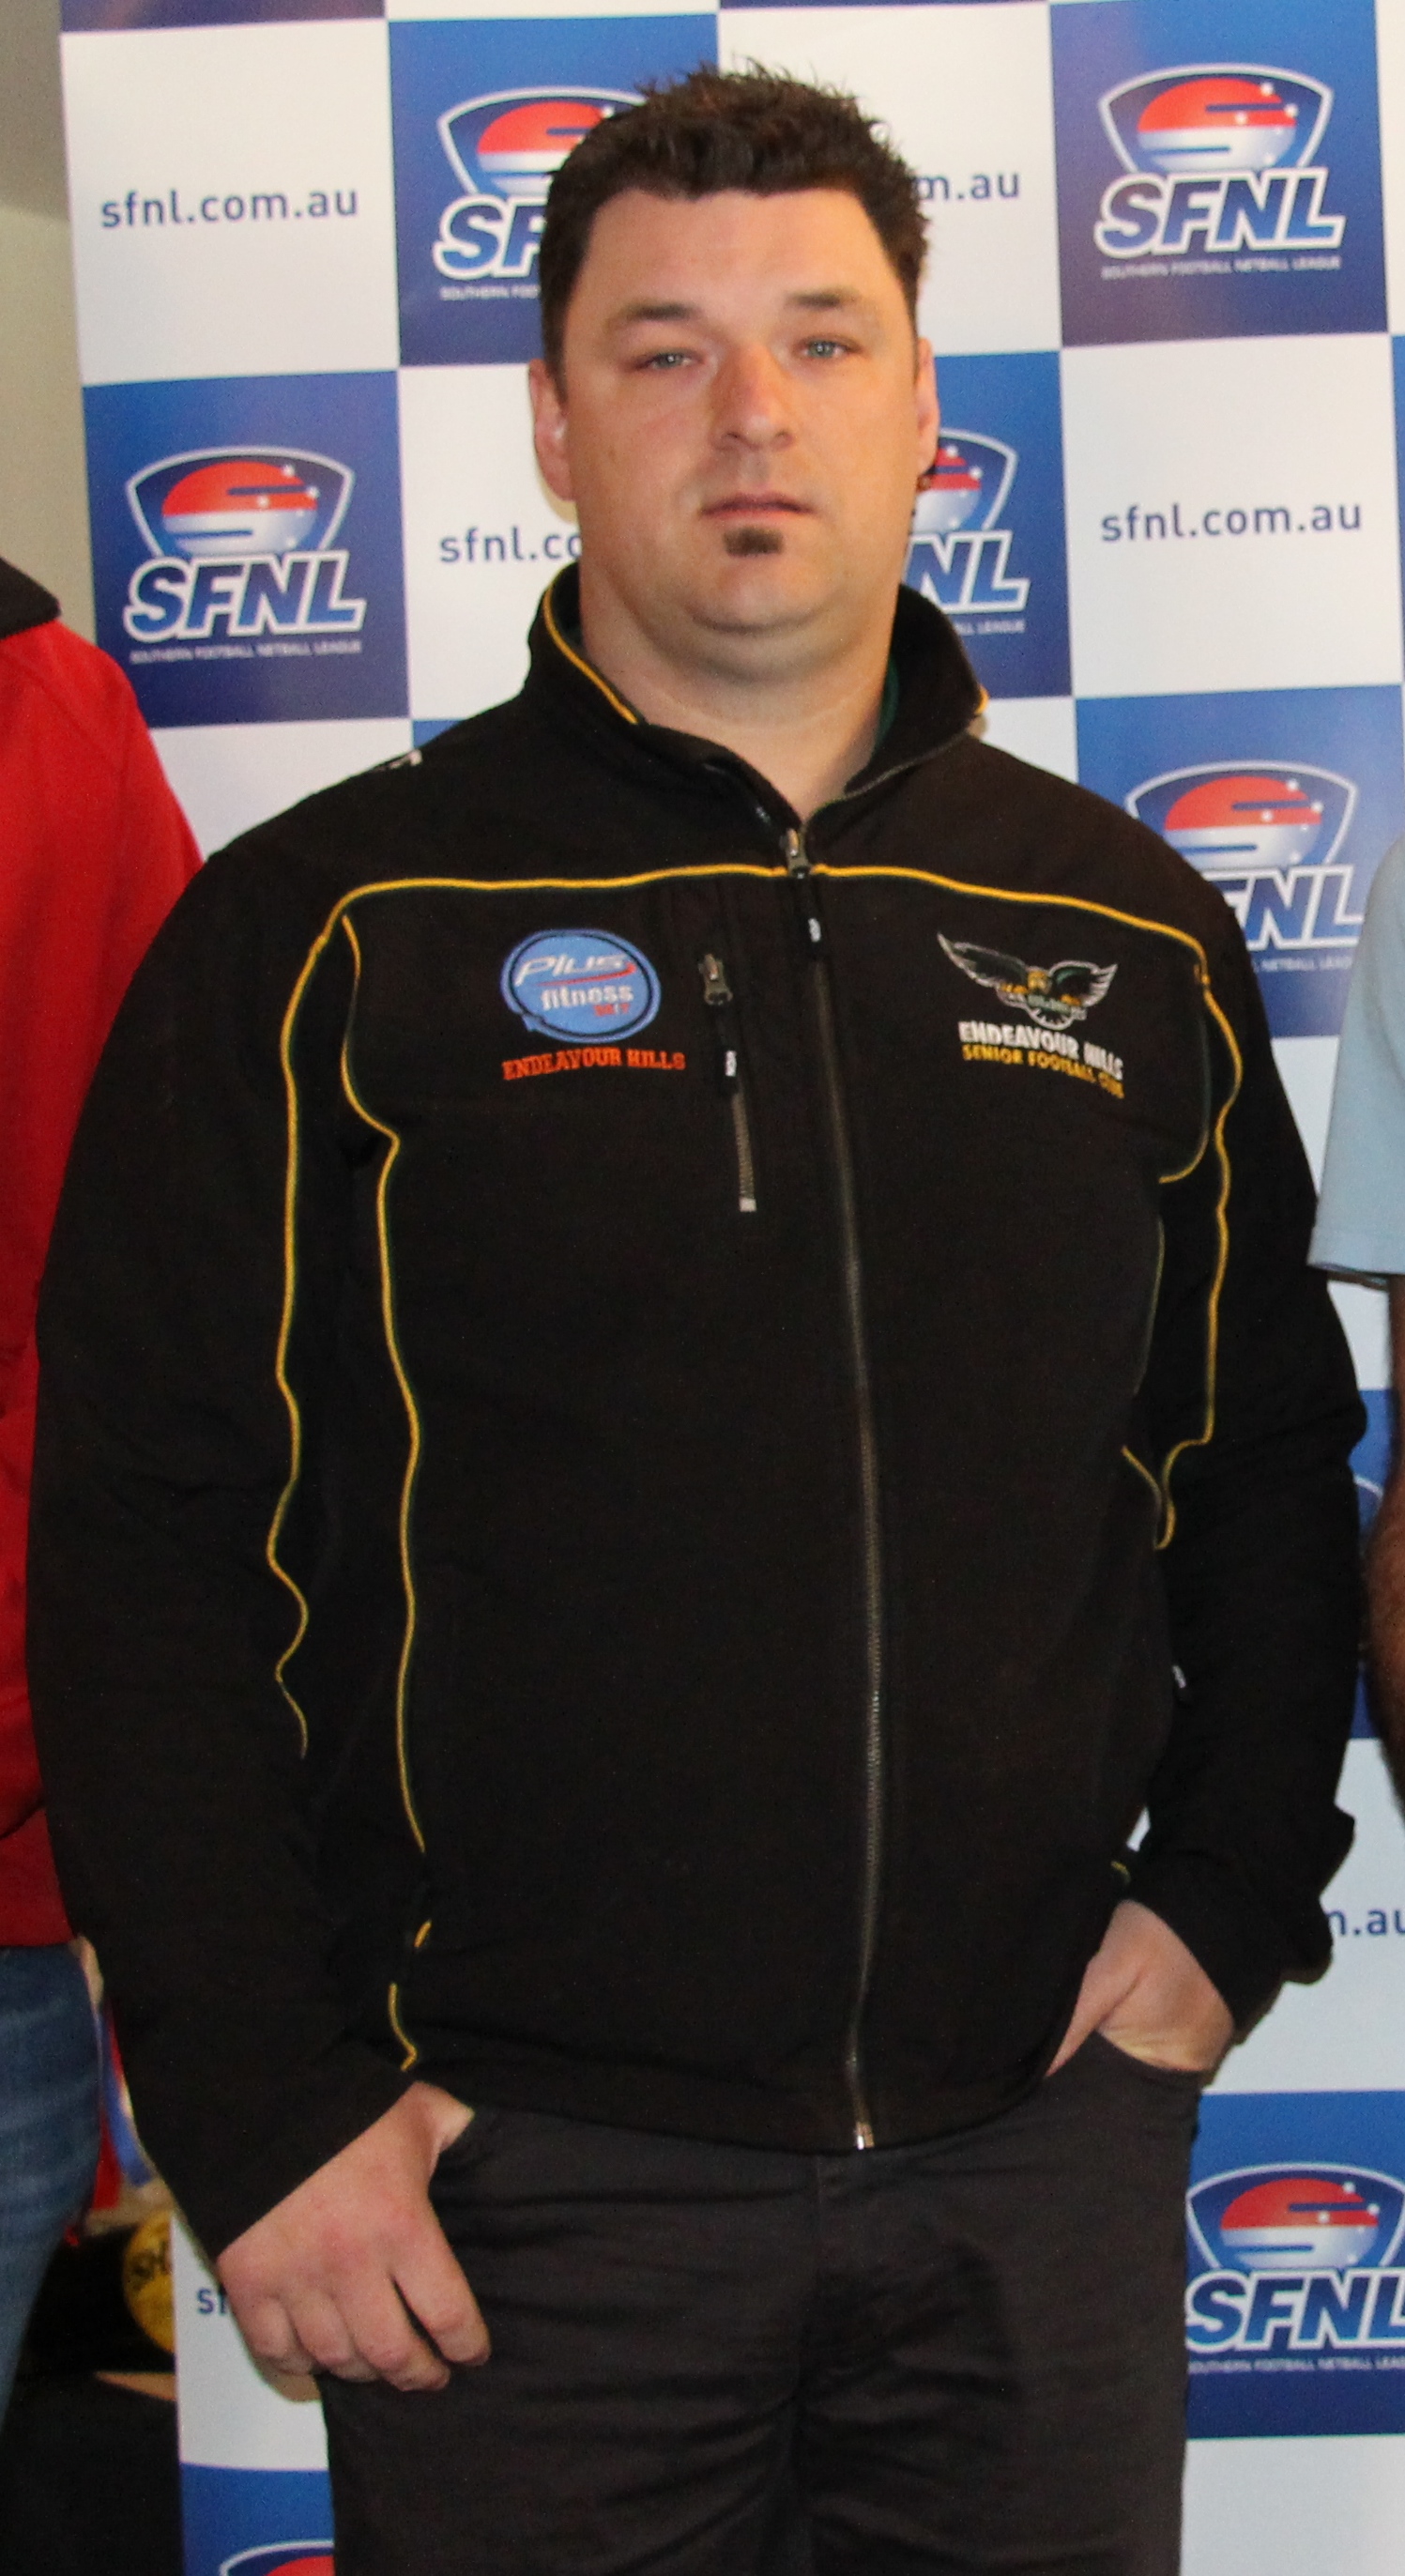 Rob Dipper led the Falcons to a maiden Grand Final in his first season in charge.